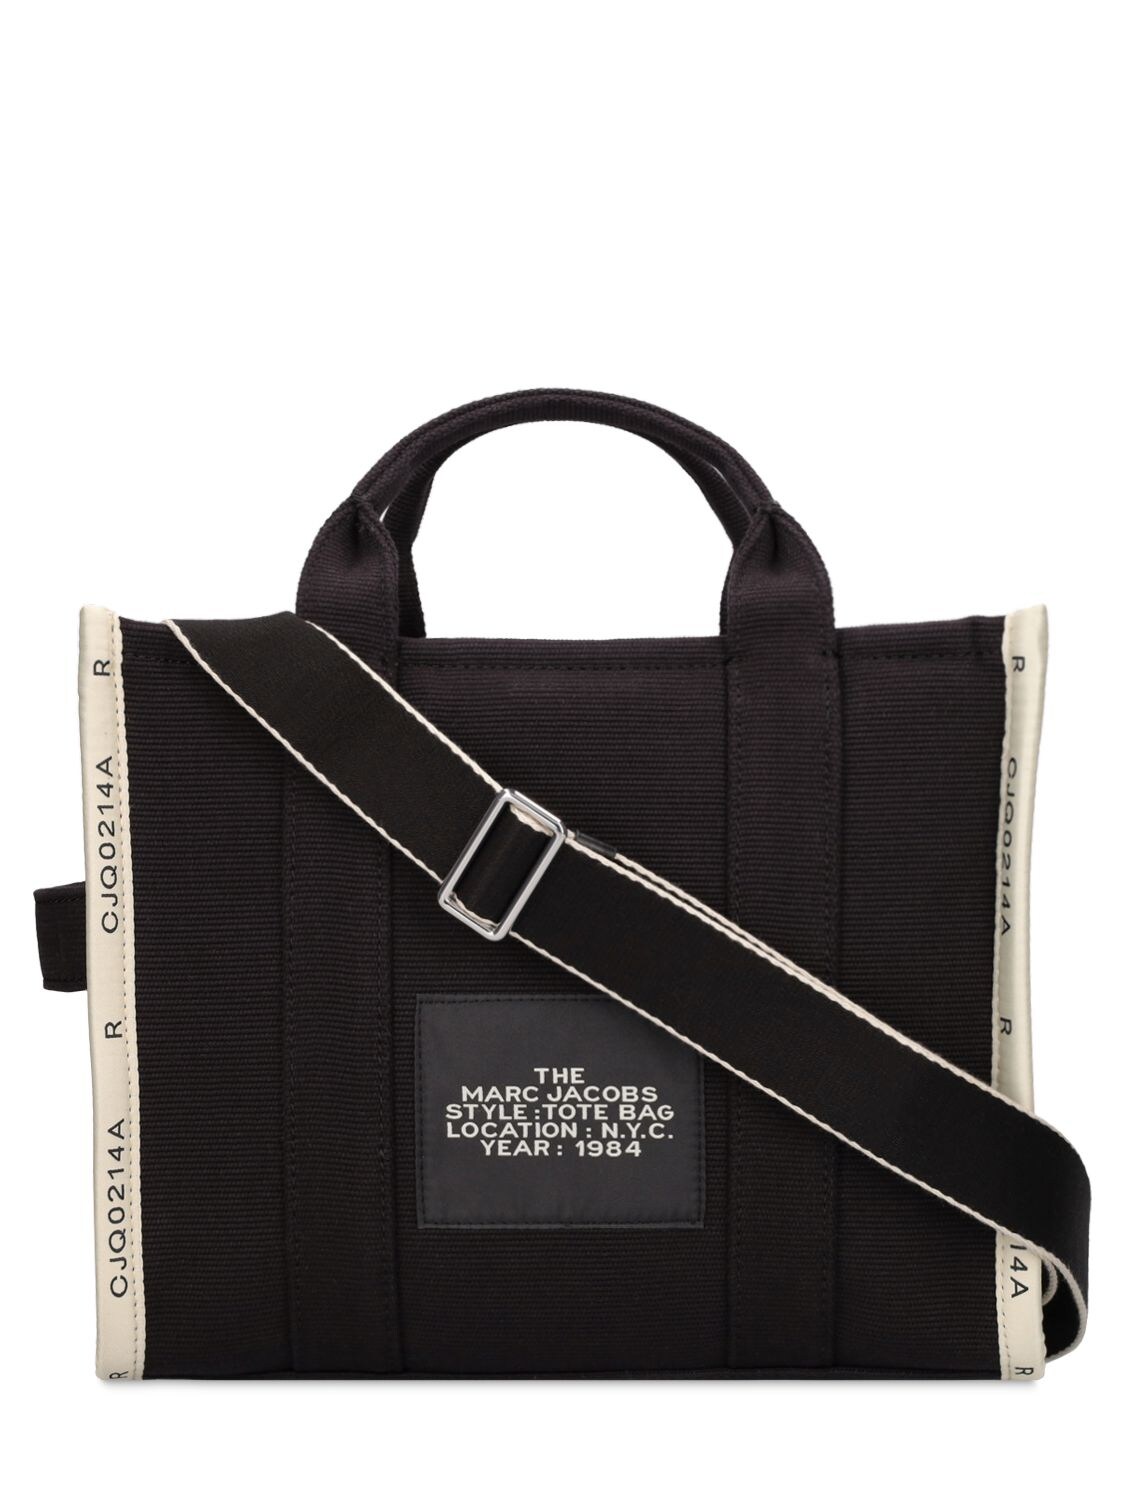 Shop Marc Jacobs (the) The Medium Tote Cotton Jacquard Bag In Black